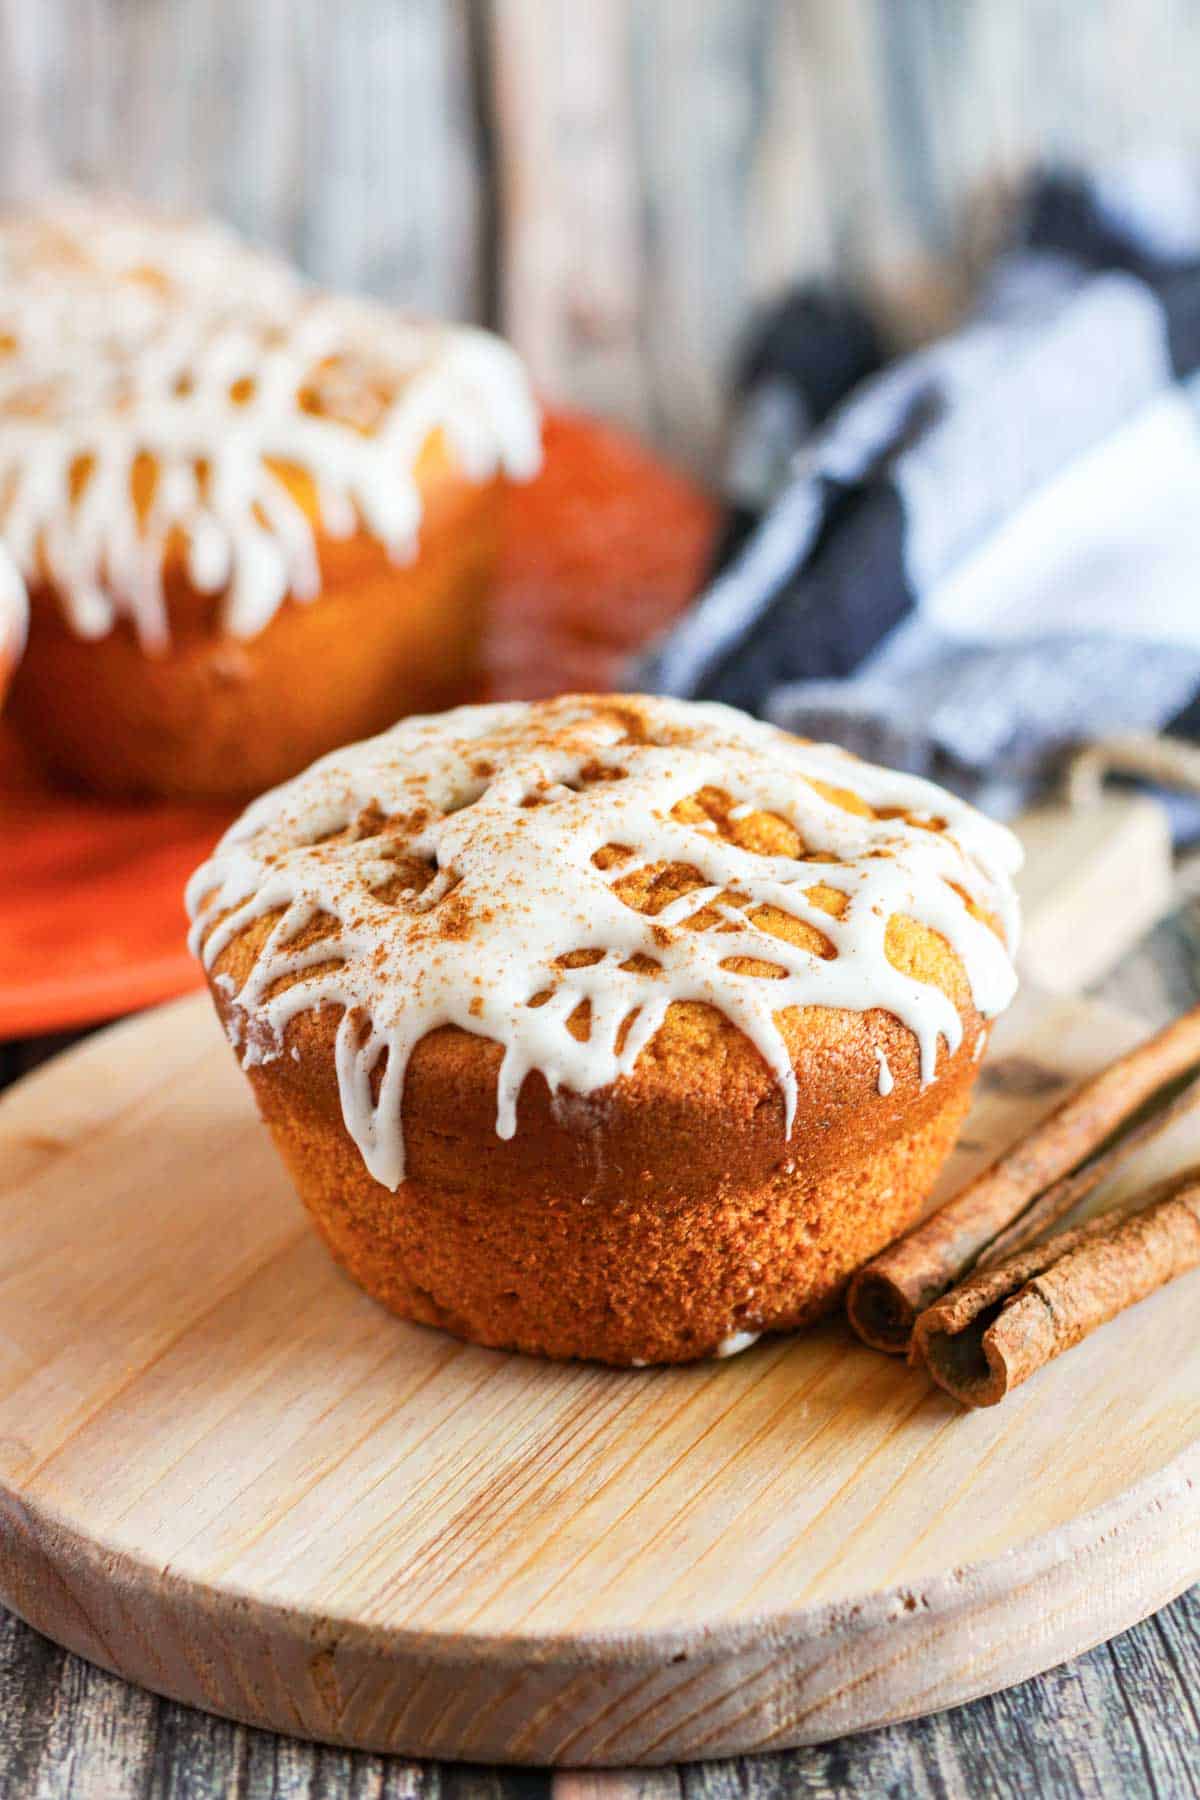 A spiced pumpkin muffin with drizzled glaze on a wooden cutting board.